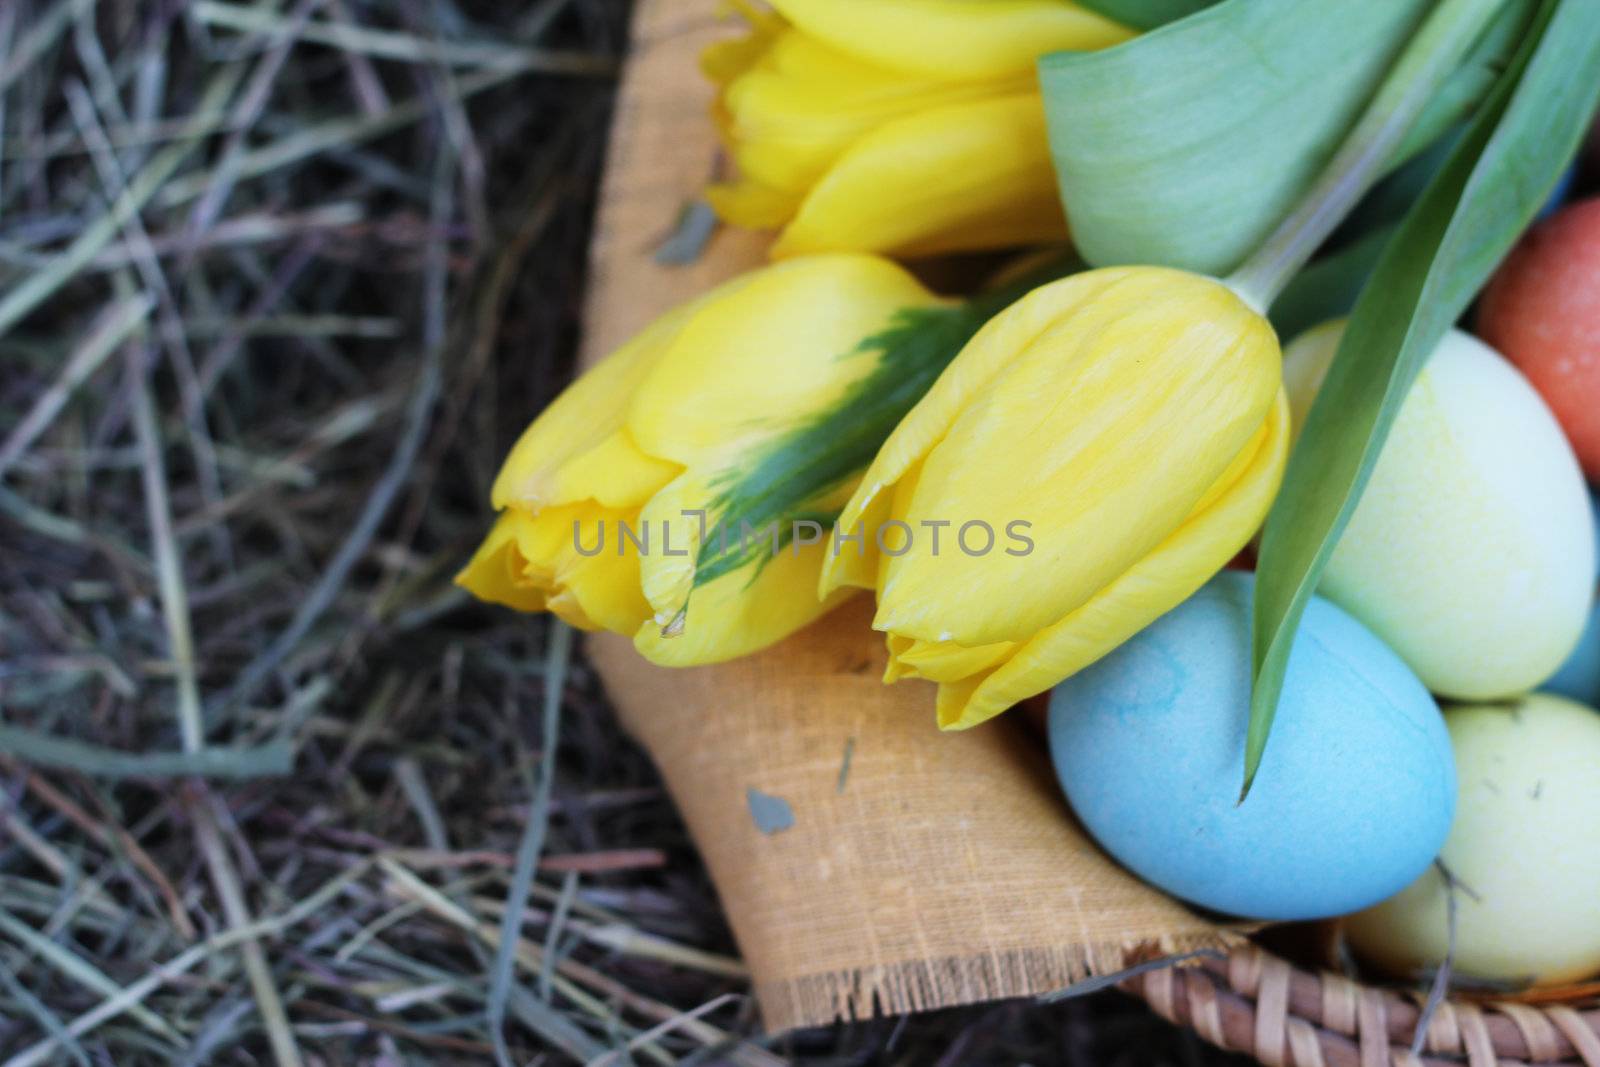 Basket of colored easter eggs and tulips on hay